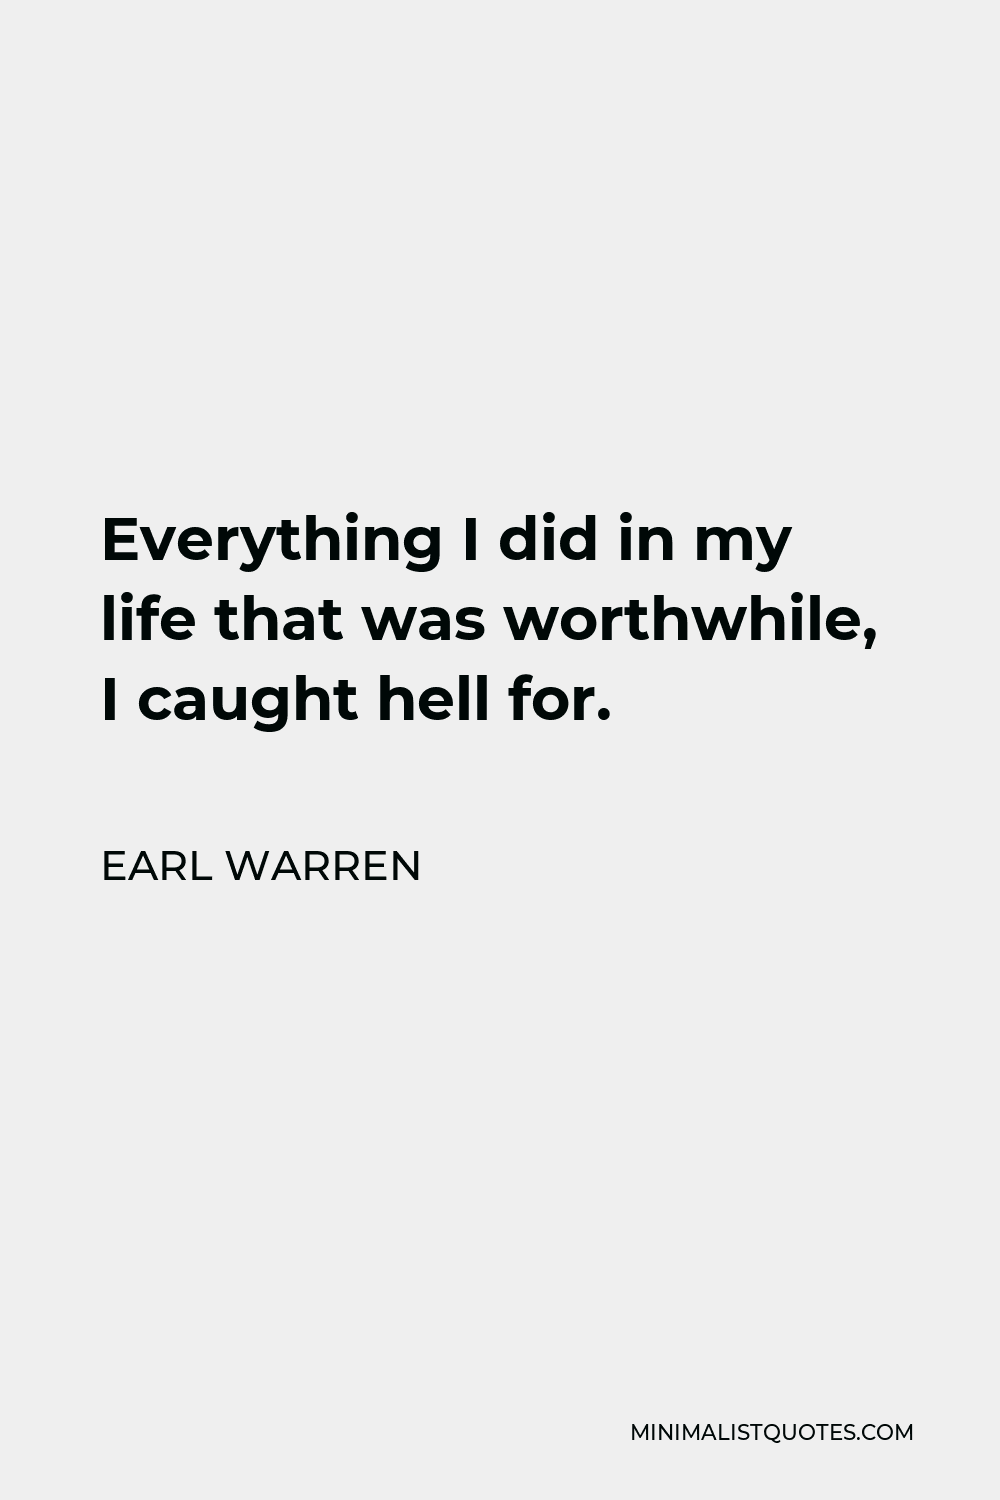 Earl Warren Quote - Everything I did in my life that was worthwhile, I caught hell for.